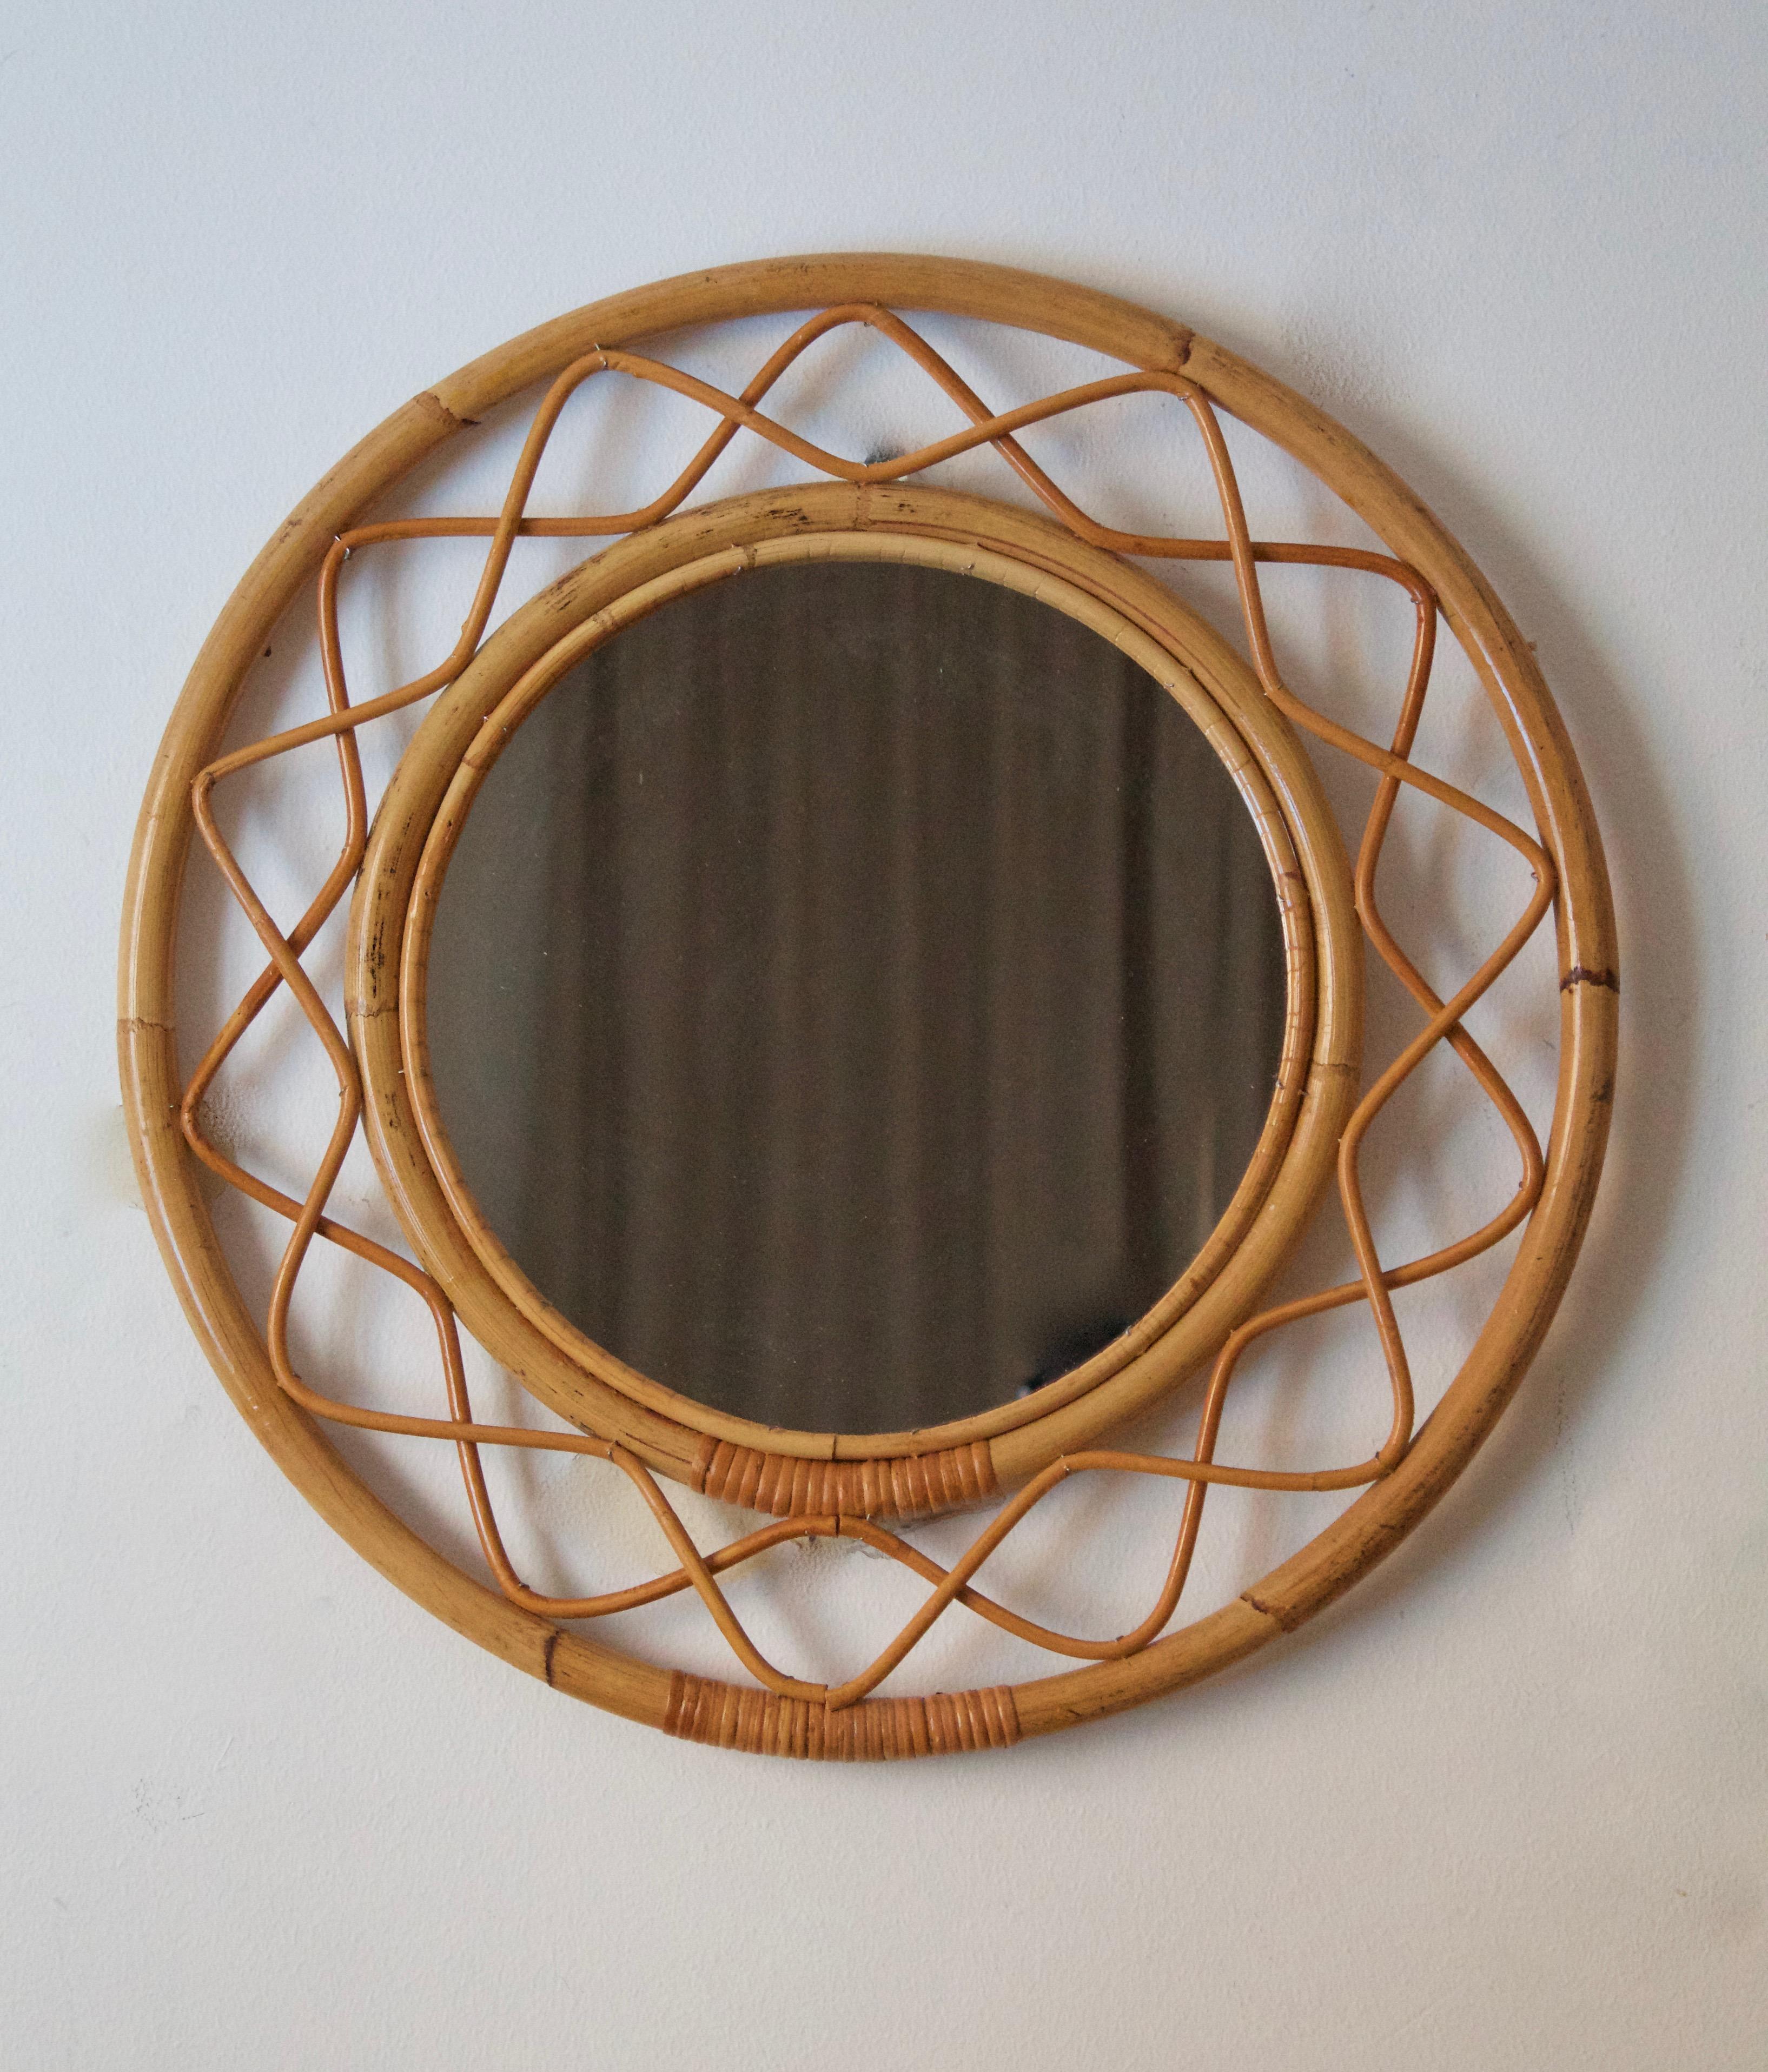 An organic mirror, of unknown Swedish production. This mirror retailed by Svenskt Tenn, the iconic Swedish firm founded by Estrid Ericson and creatively led by Josef Frank. 

In finely braided wicker / rattan / cane and bambo.

Other designers